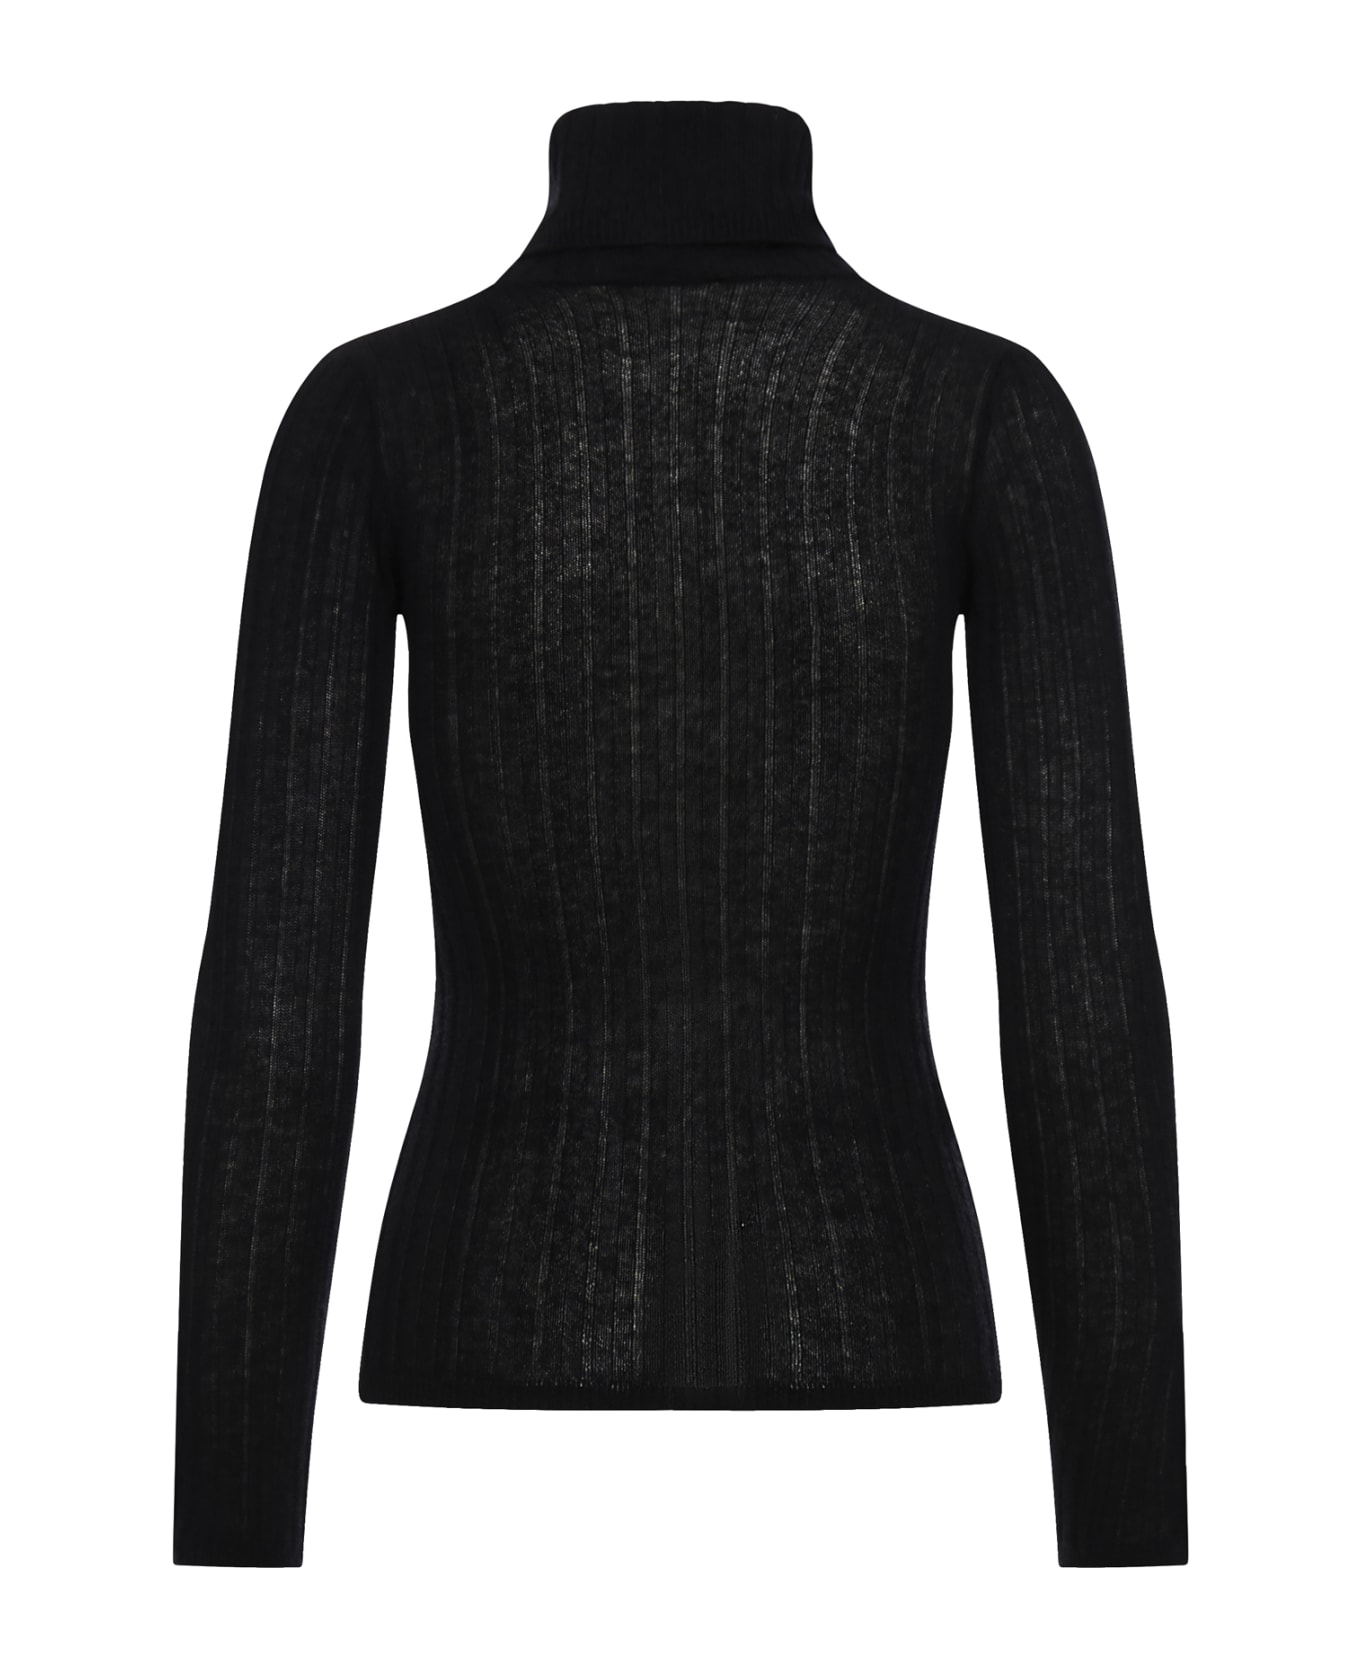 Durazzi Milano "cashmire High Neck Top "ribbed Turtle Neck Knitted Top With Branded Cuff Bottons In Cashmere - Black